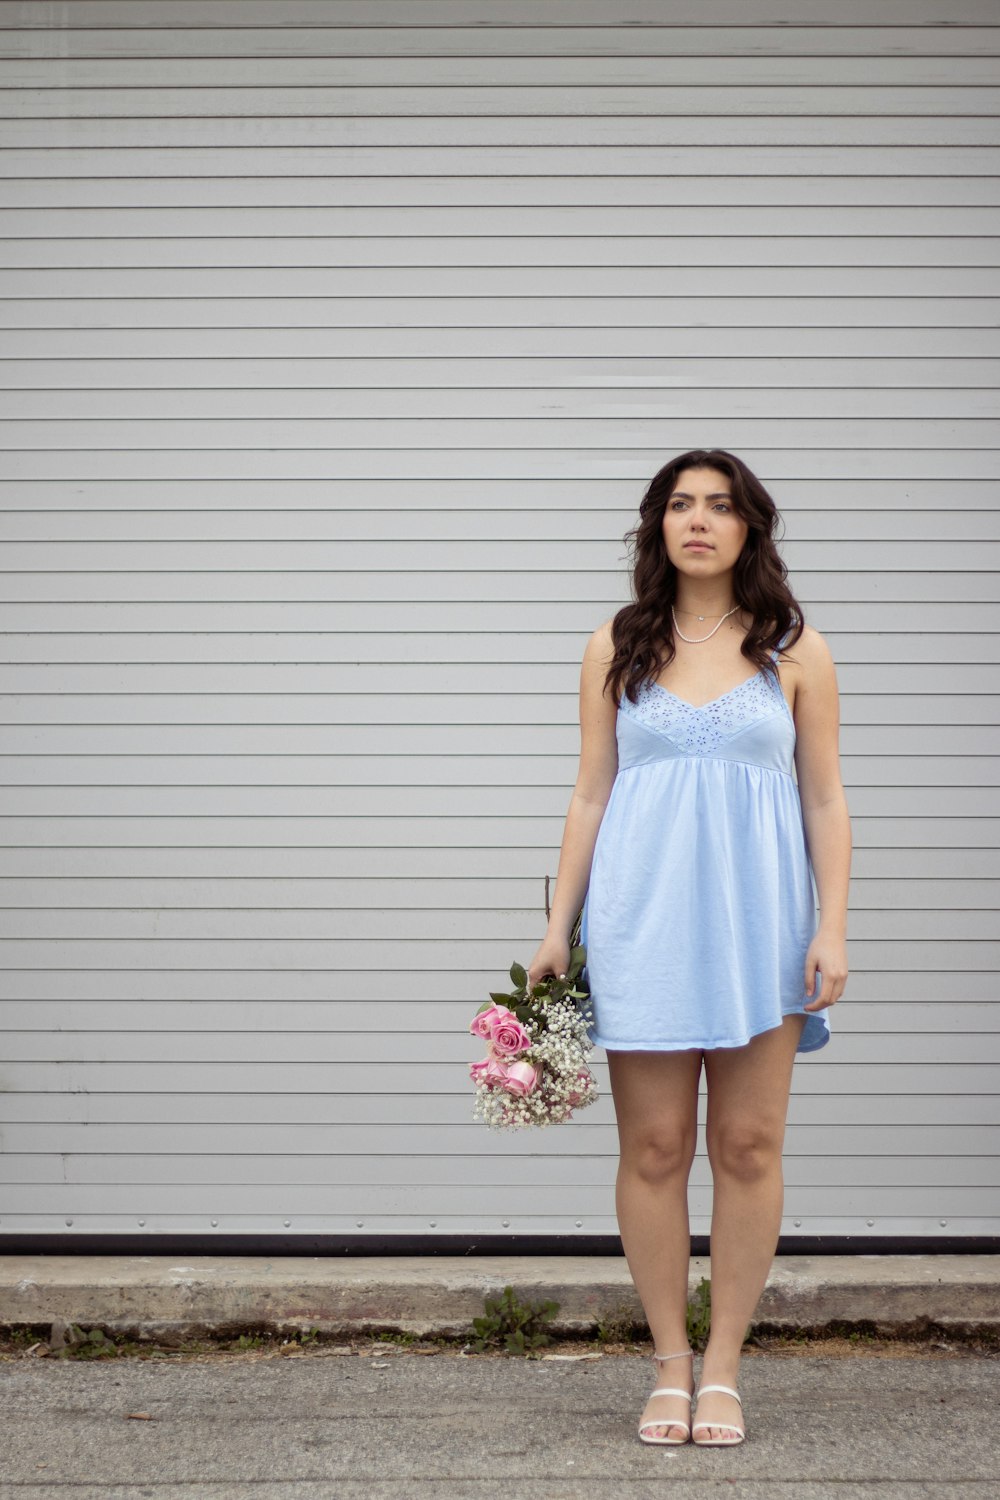 a woman standing in front of a garage door holding a bouquet of flowers